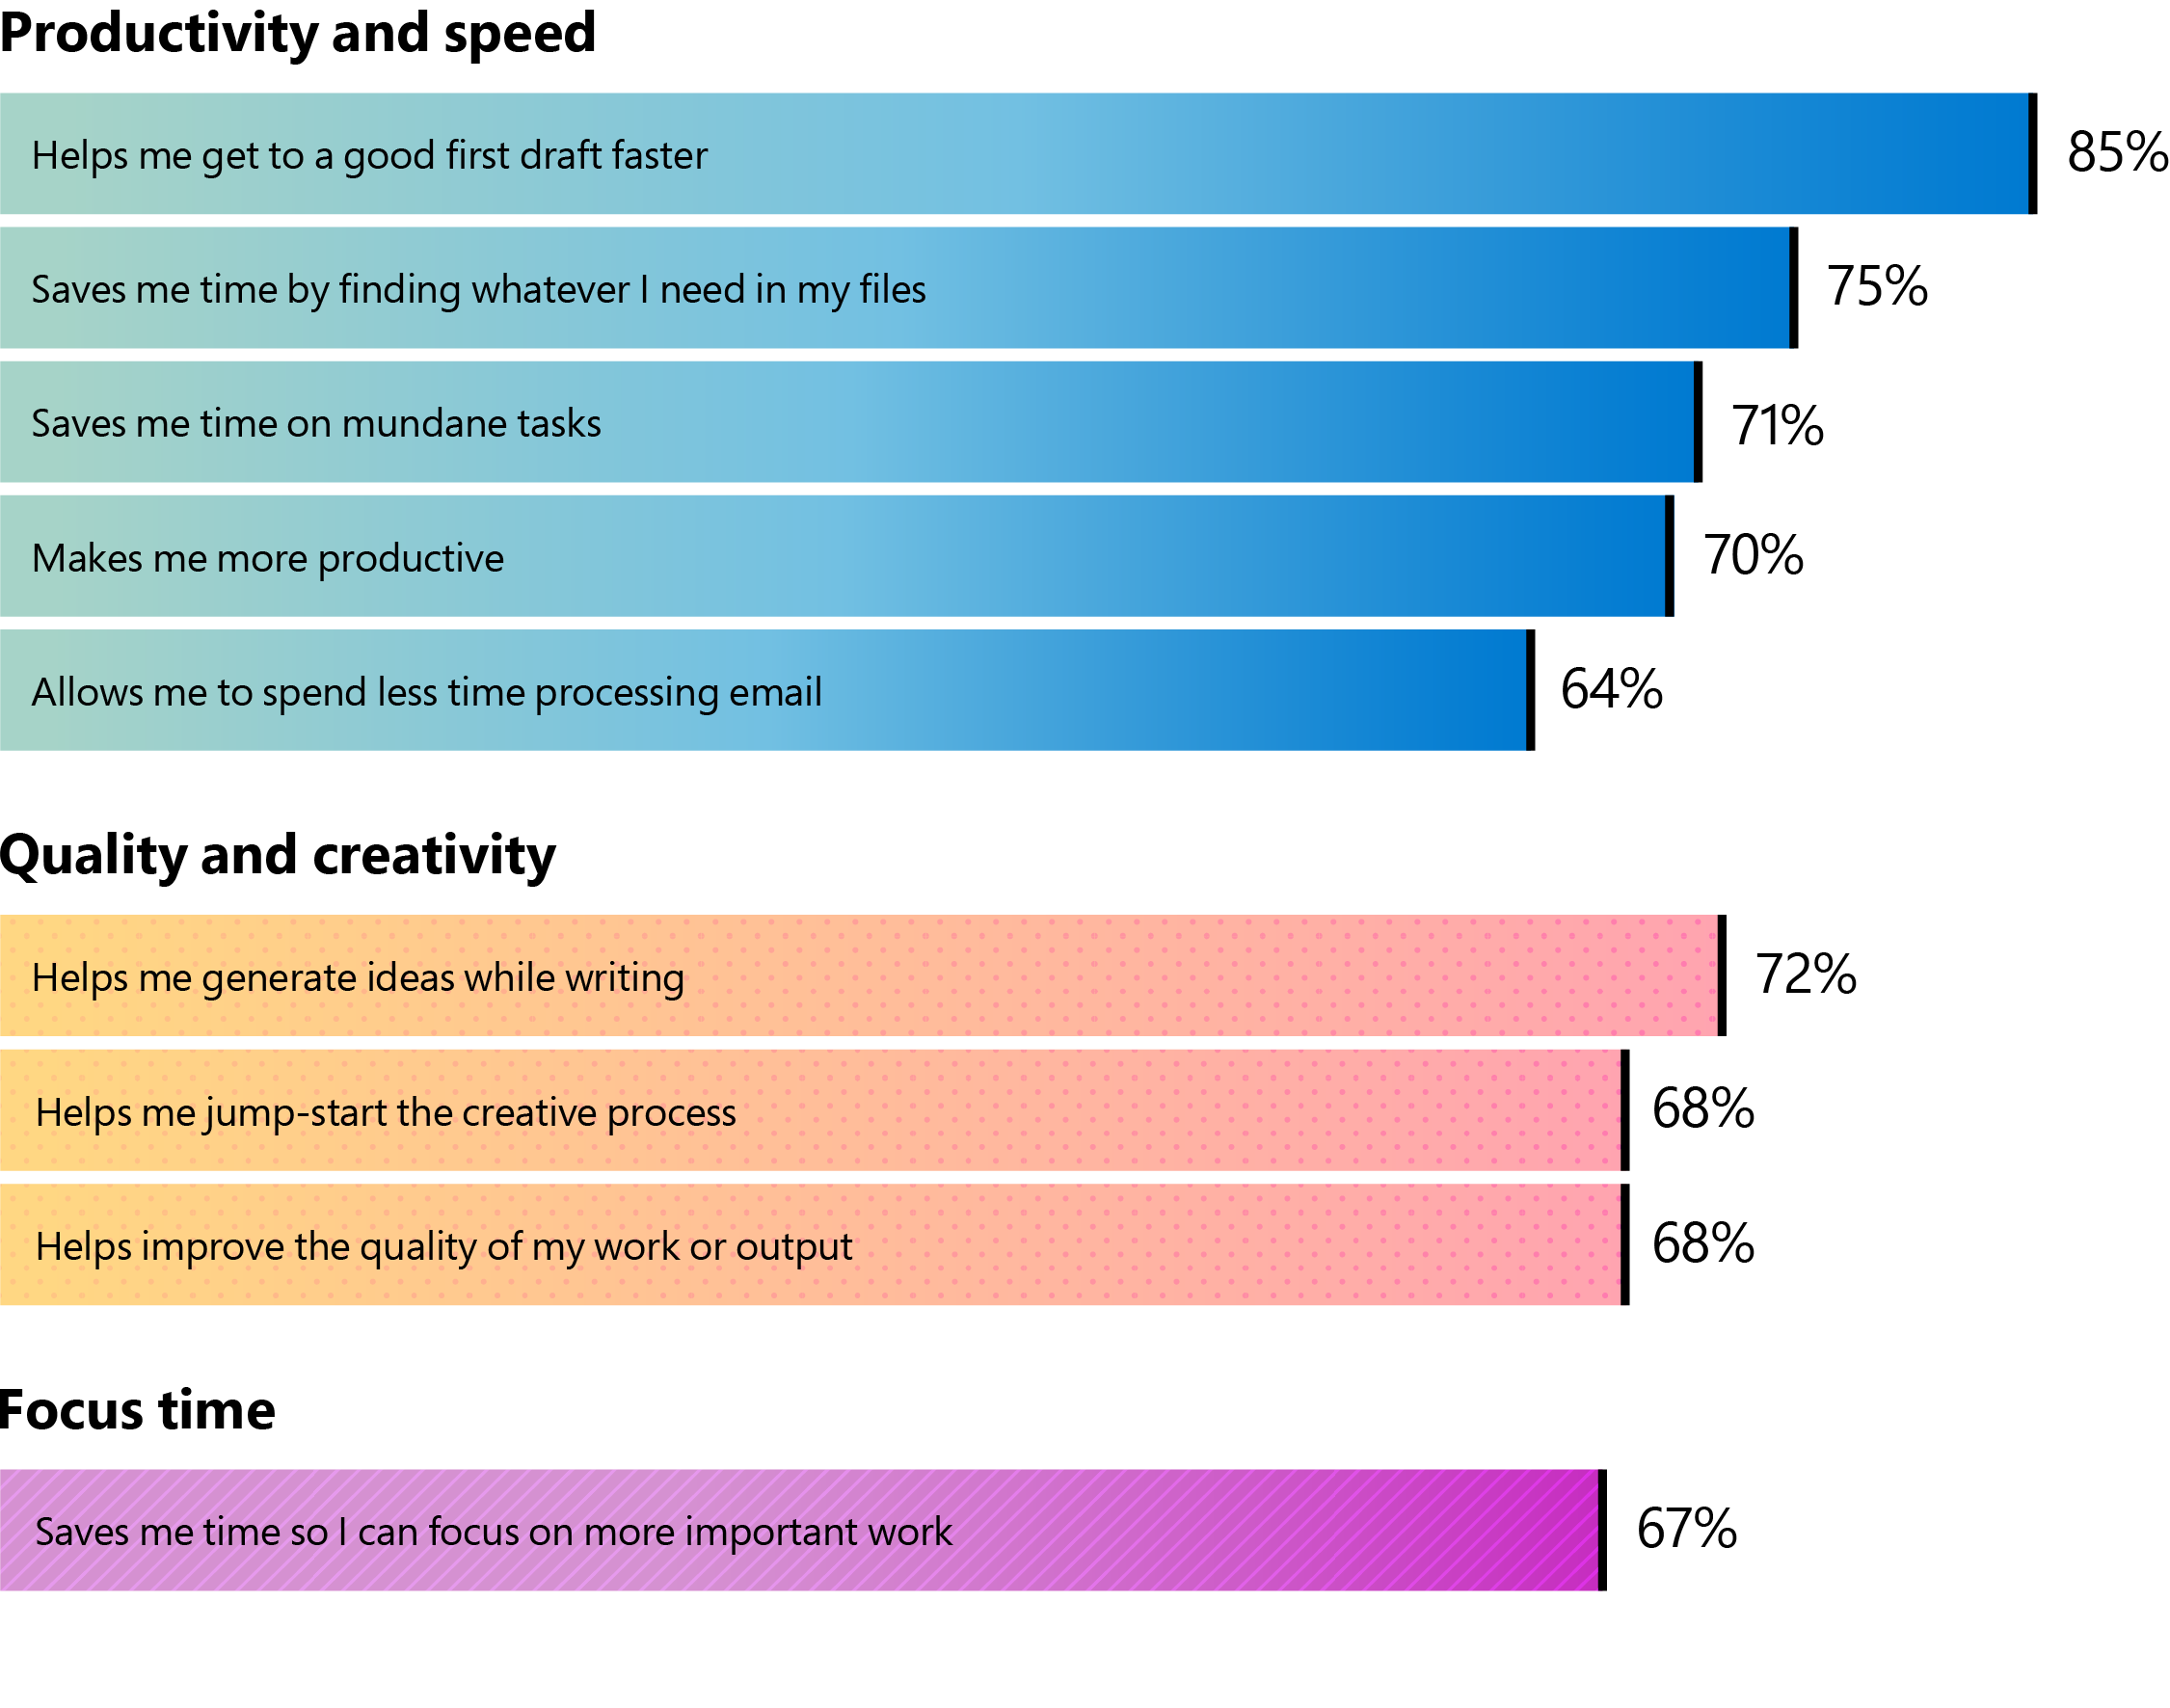 Bar chart showing the following: In terms of productivity and speed, 85% of early Copilot users feel that it helps them get to a good first draft faster; 75% say it saves time accessing files; 71% find it reduces time on mundane tasks; 70% believe it enhances their productivity; 64% say Copilot helps them process emails more efficiently. In terms of quality and creativity, 72% of users report that Copilot aids in generating ideas during writing; 68% feel it jump-starts the creative process; 68% say it improves the quality of their work. And 67% of users agree that Copilot saves time, allowing them to focus on more important work.